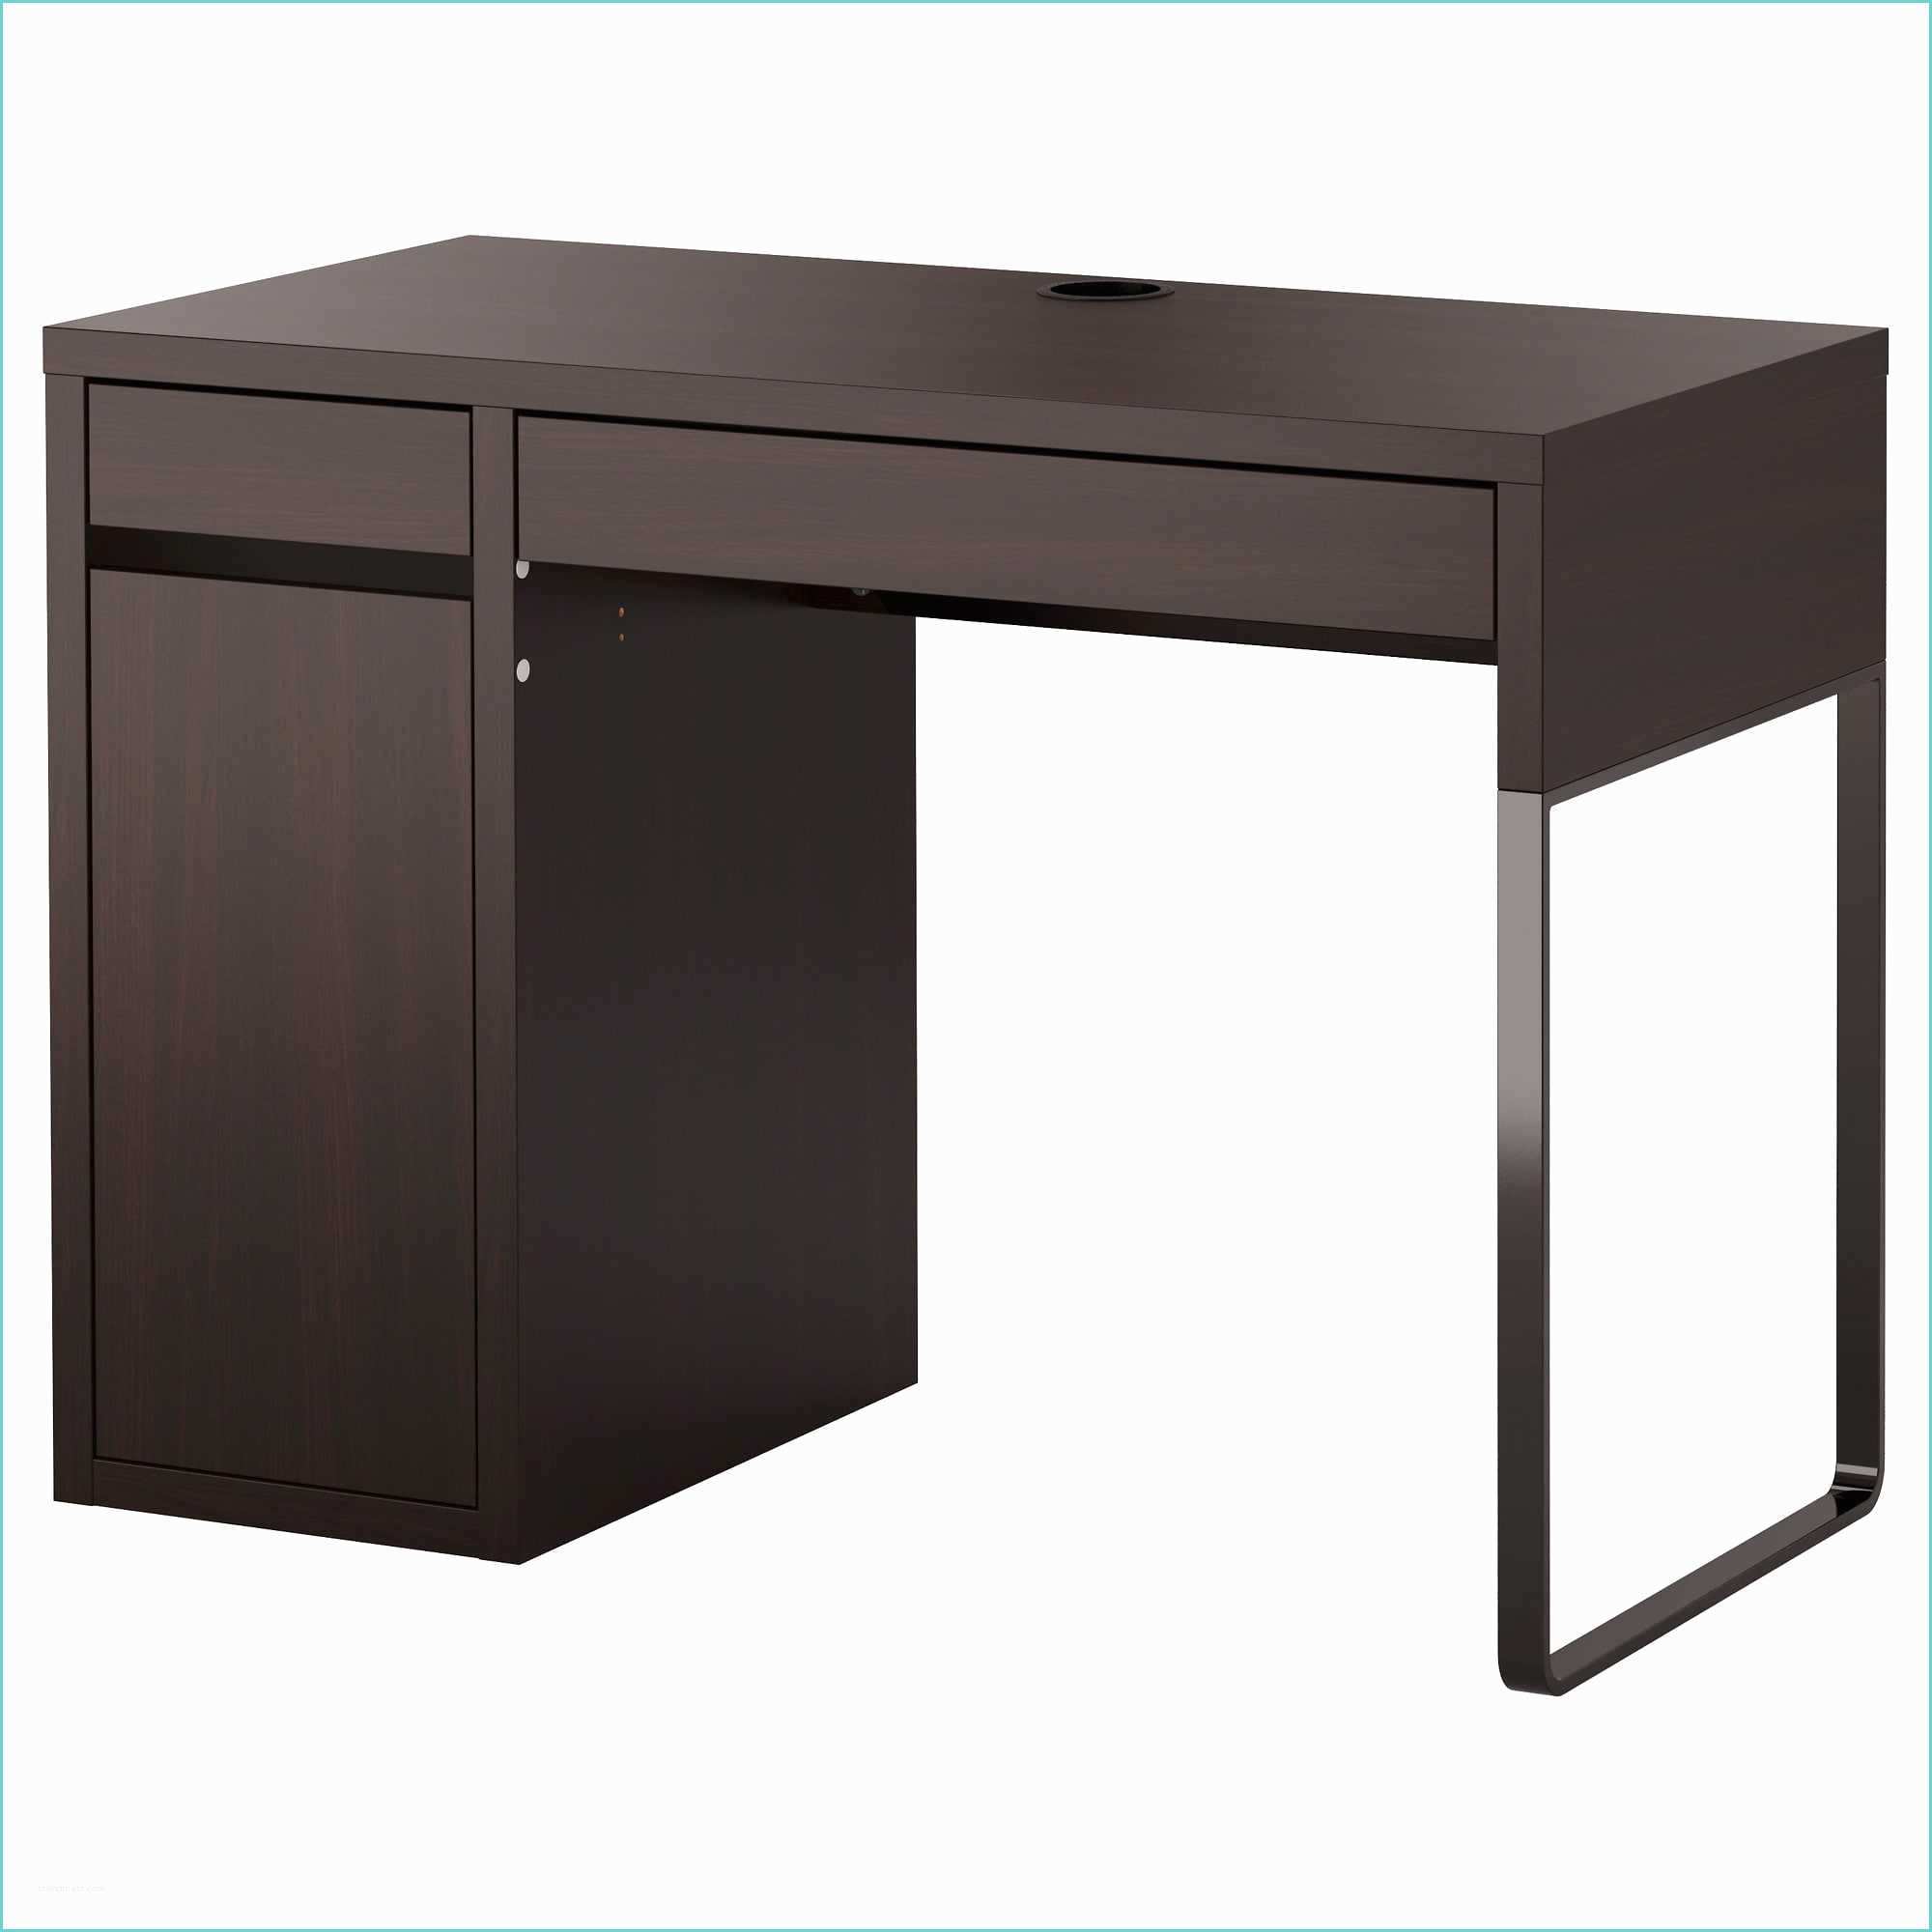 Ikea Micke Desk with Integrated Storage Micke Desk Black Brown Collection Including Outstanding